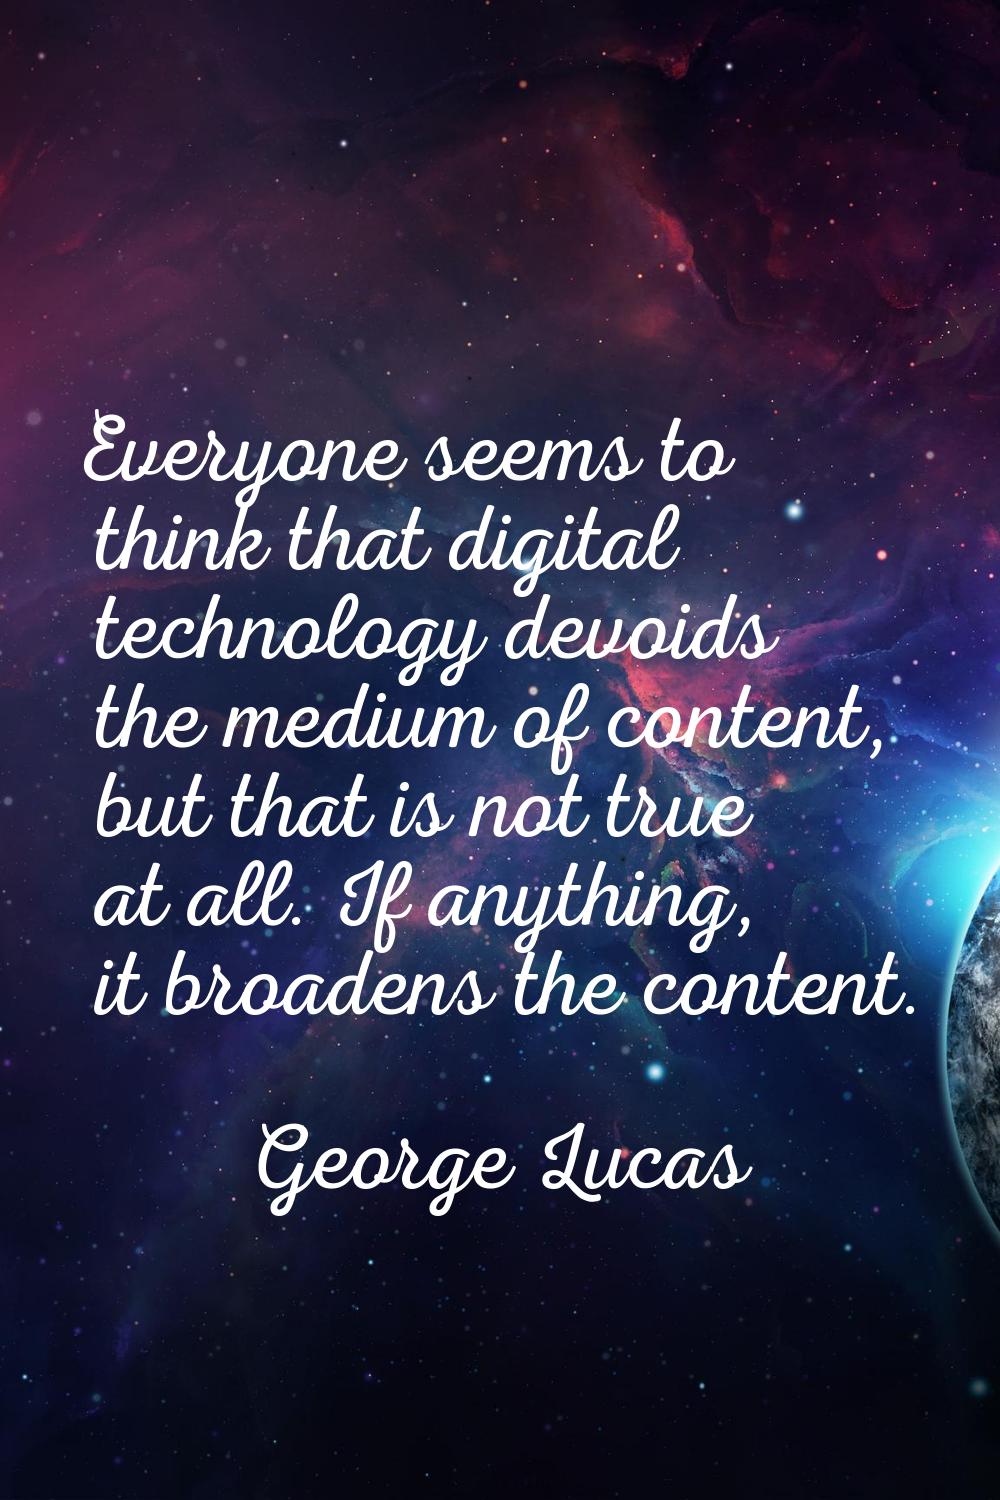 Everyone seems to think that digital technology devoids the medium of content, but that is not true